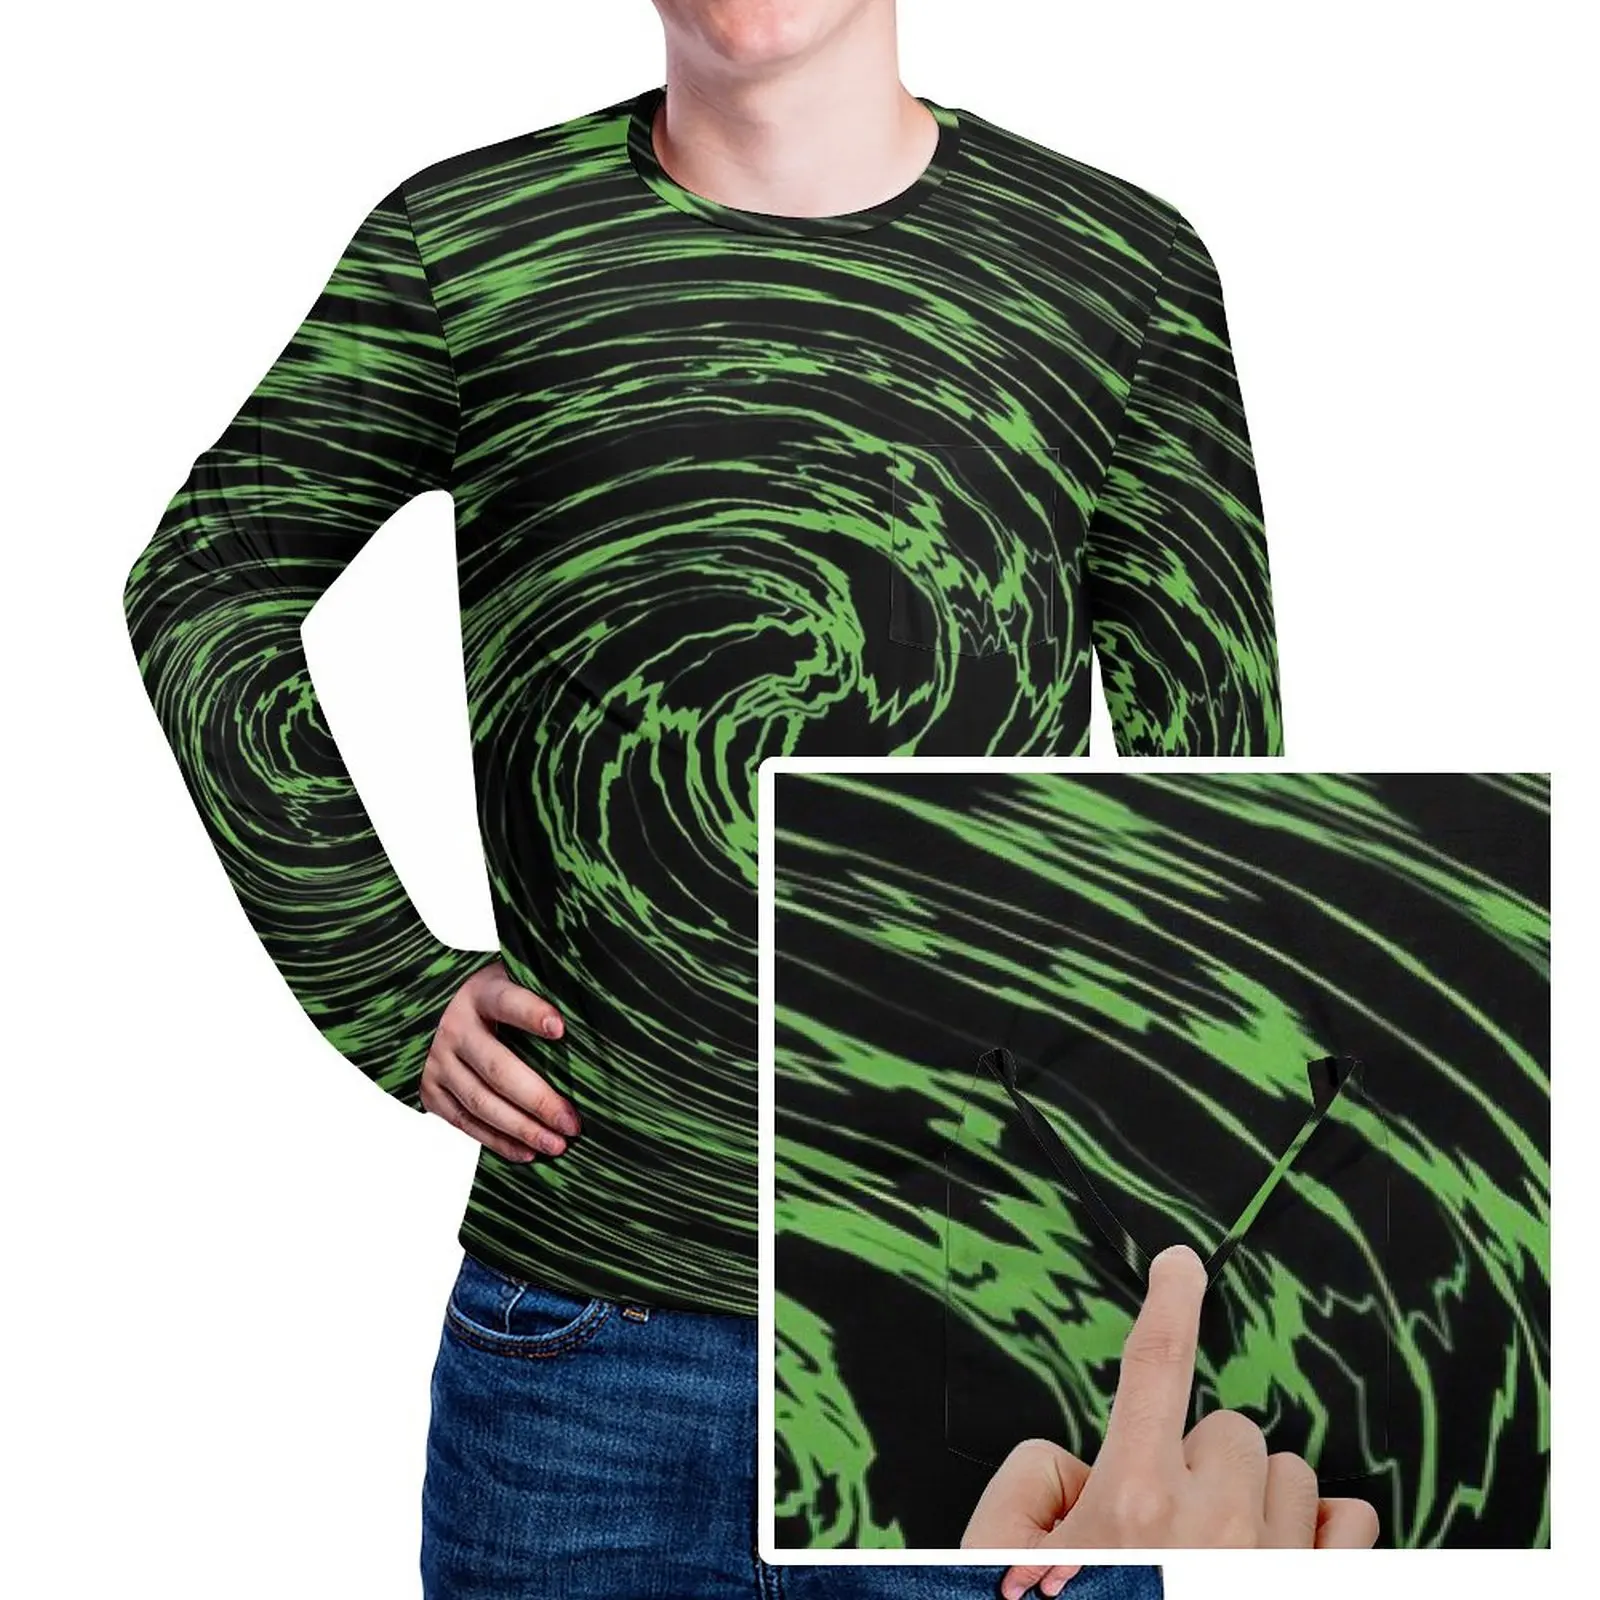 

Shallow Water T-Shirt Spring Green Vortex Print Aesthetic T-Shirts Mens Hippie Graphic Tee Shirt Large Size 4XL 5XL